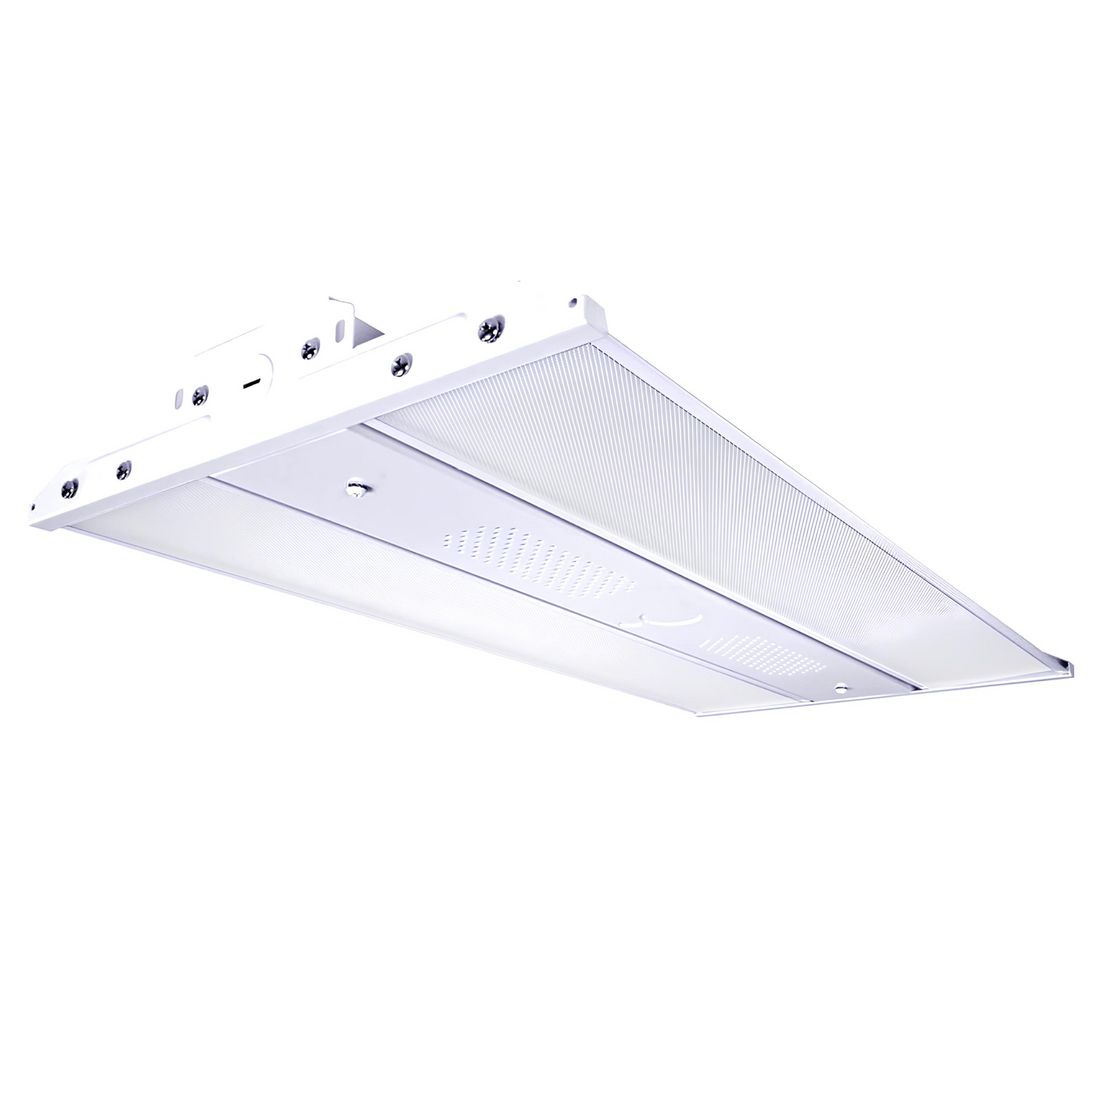 LED Linear High Bay Light - 110W - 5000K- 120-277VAC - 15400 Lumens - 0-10V Dimmable - UL Listed - DLC Premium Listed - 5 Years Warranty - 2-Pack